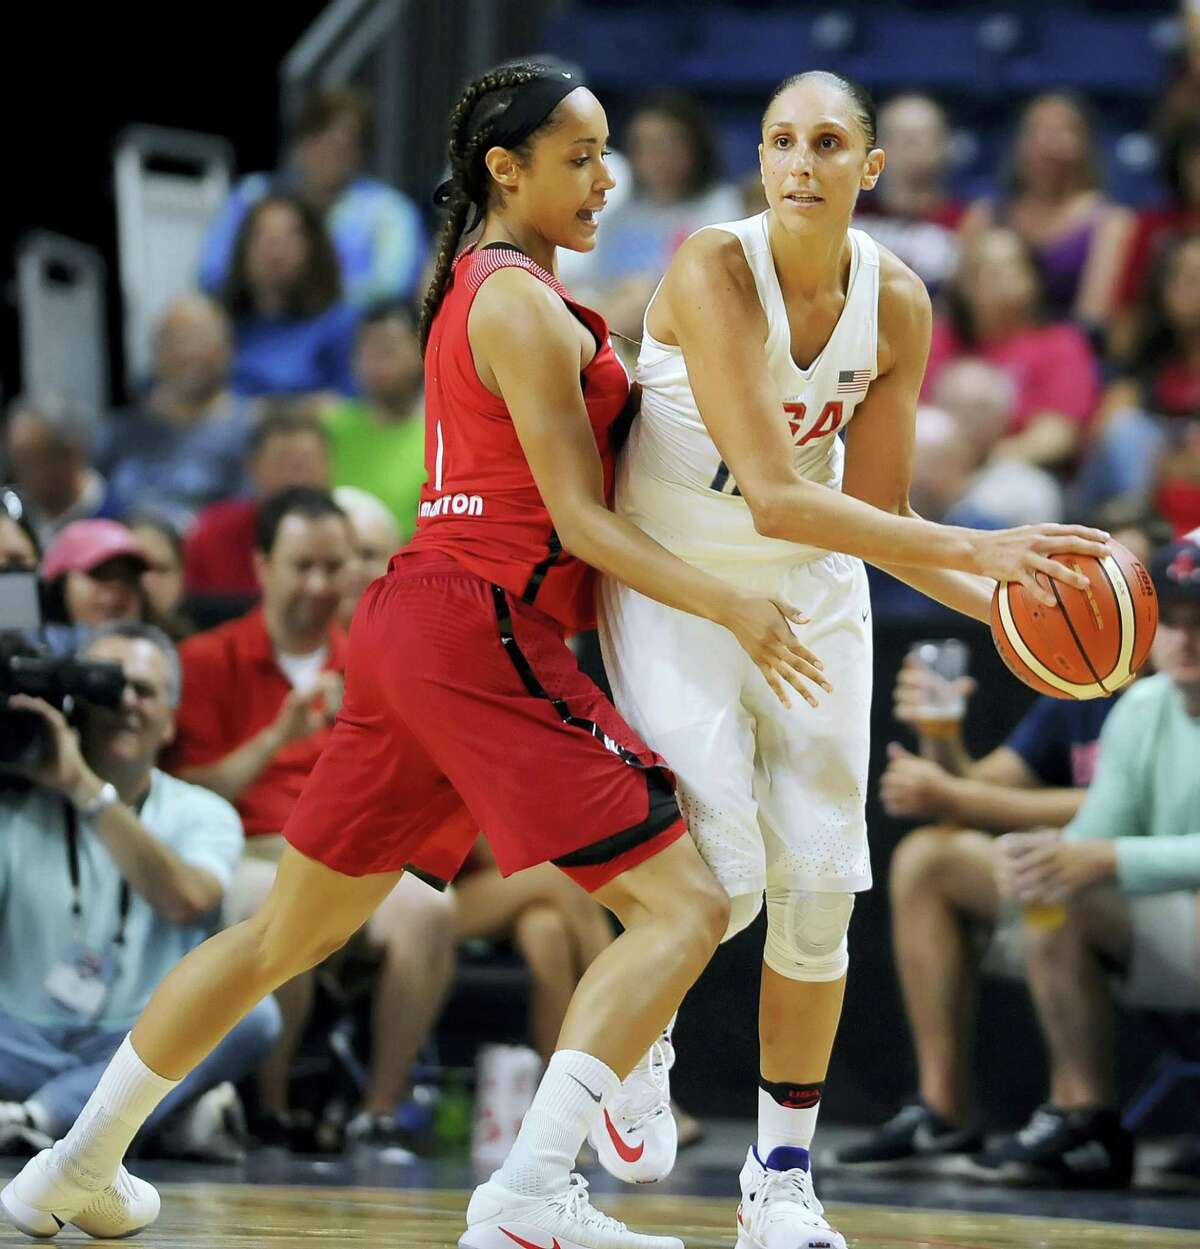 United States’ Diana Taurasi keeps the ball from Canada’s Nayo Raincock-Ekunwe during the first half of an exhibition basketball game Friday in Bridgeport.